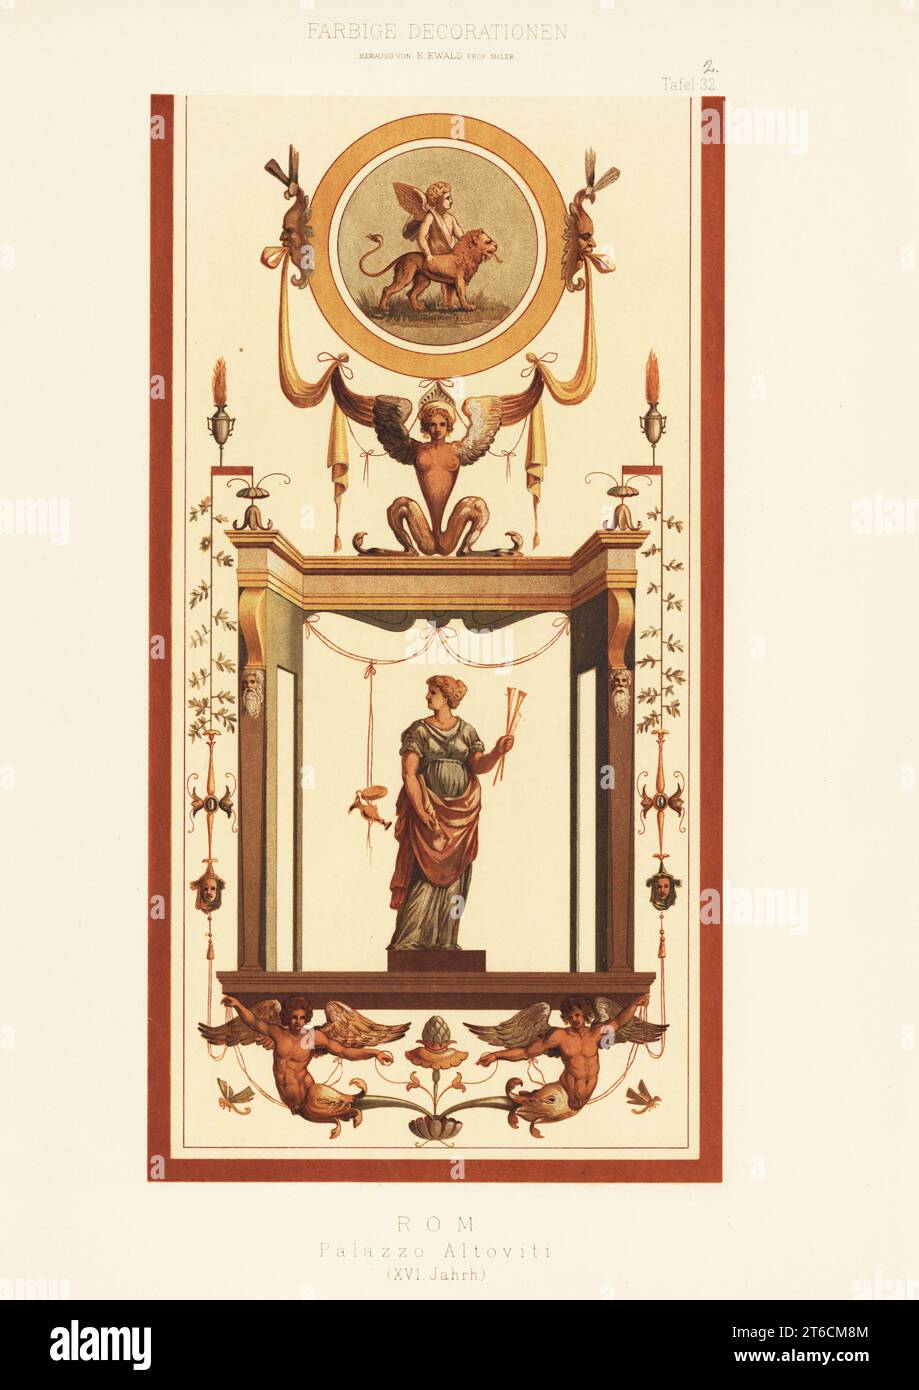 Wall painting in the Altoviti Palace, Rome, 16th century. Palazzo Altoviti, Rom, XVI Jahrh. Chromolithograph from Ernst Ewalds Farbige decorationen, alter und never Zeit (Color decoration, ancient and new eras), Ernst Wasmuth, Berlin, 1889. Stock Photo